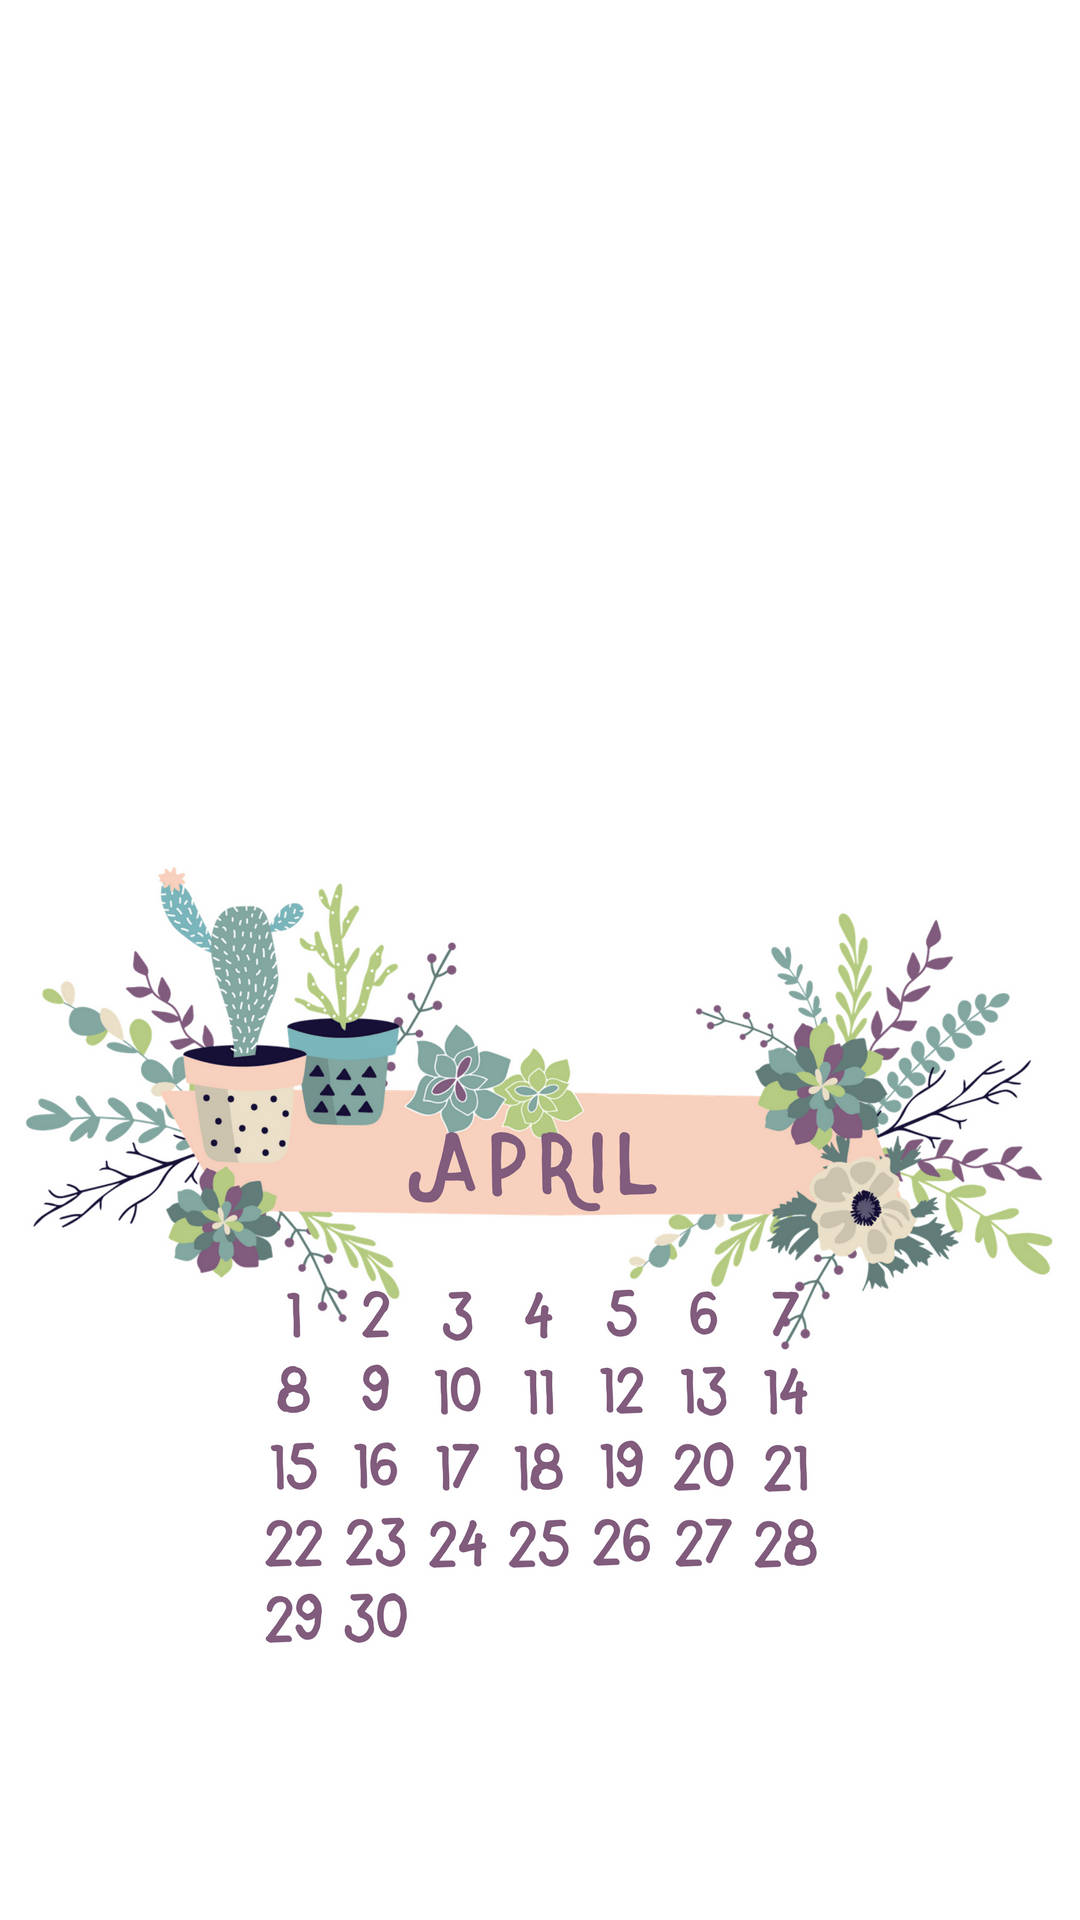 Welcome April With Fun And Versatility Background